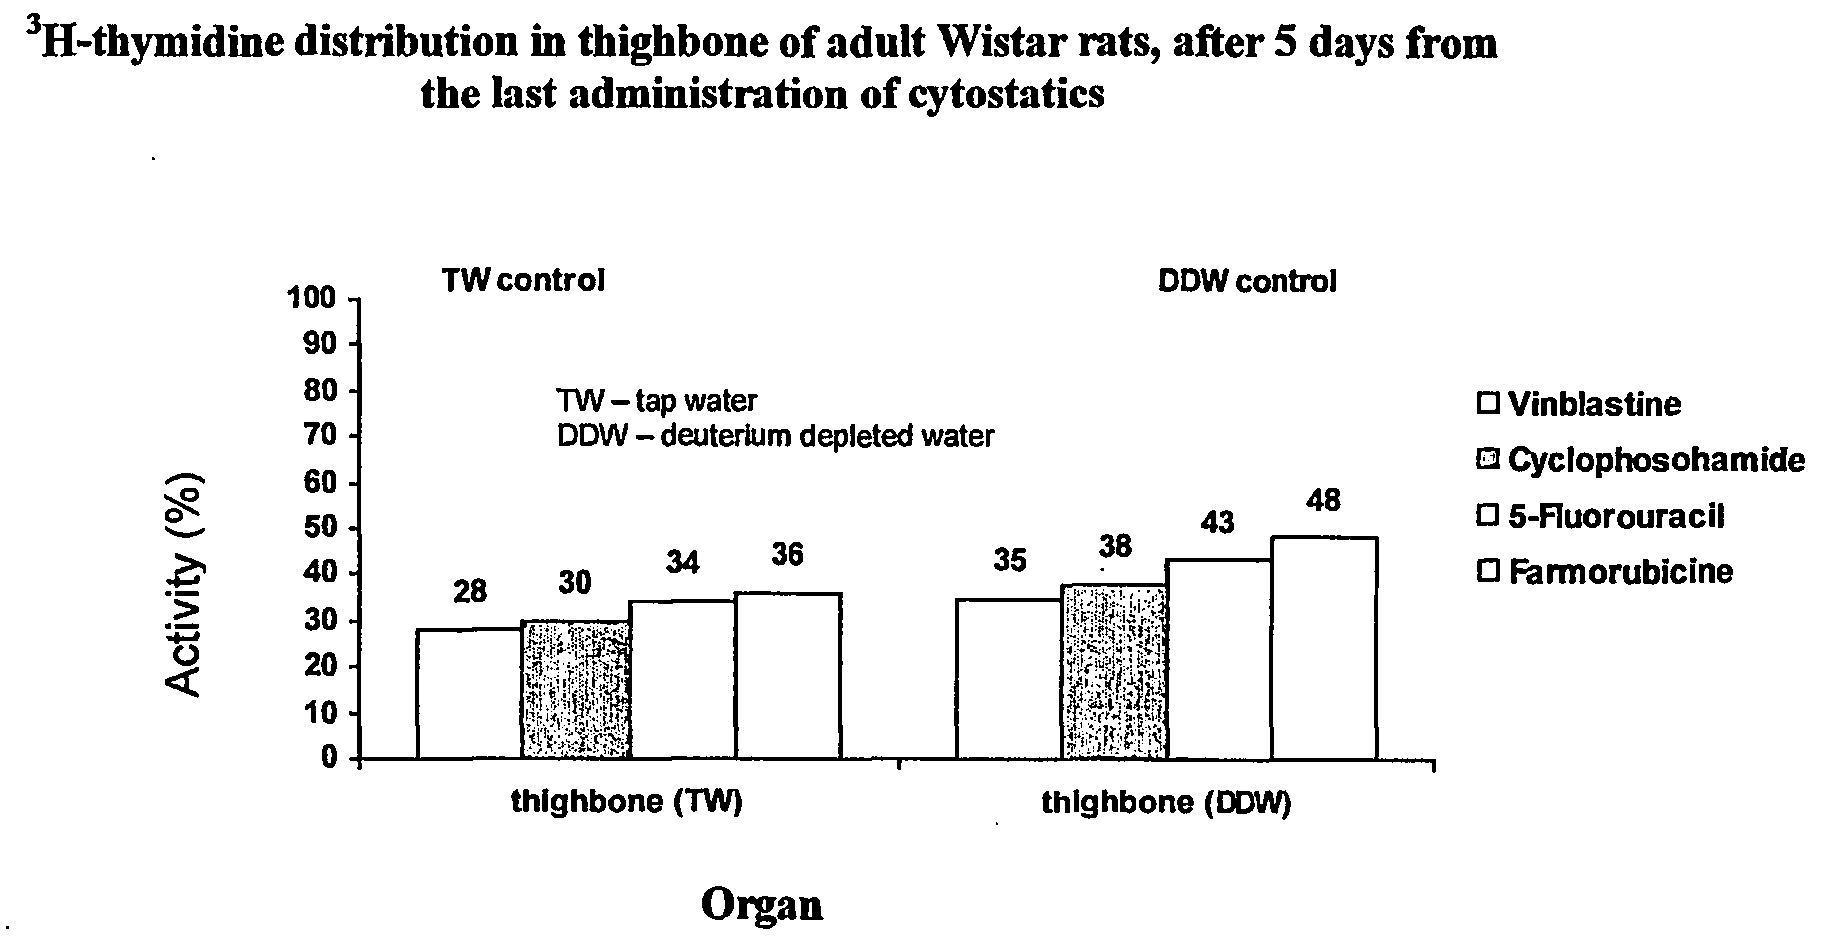 Deuterium Depleted Water (Ddw) Using As Adjuvant In Cancer Therapy For Cytostatics Toxicity Reducing